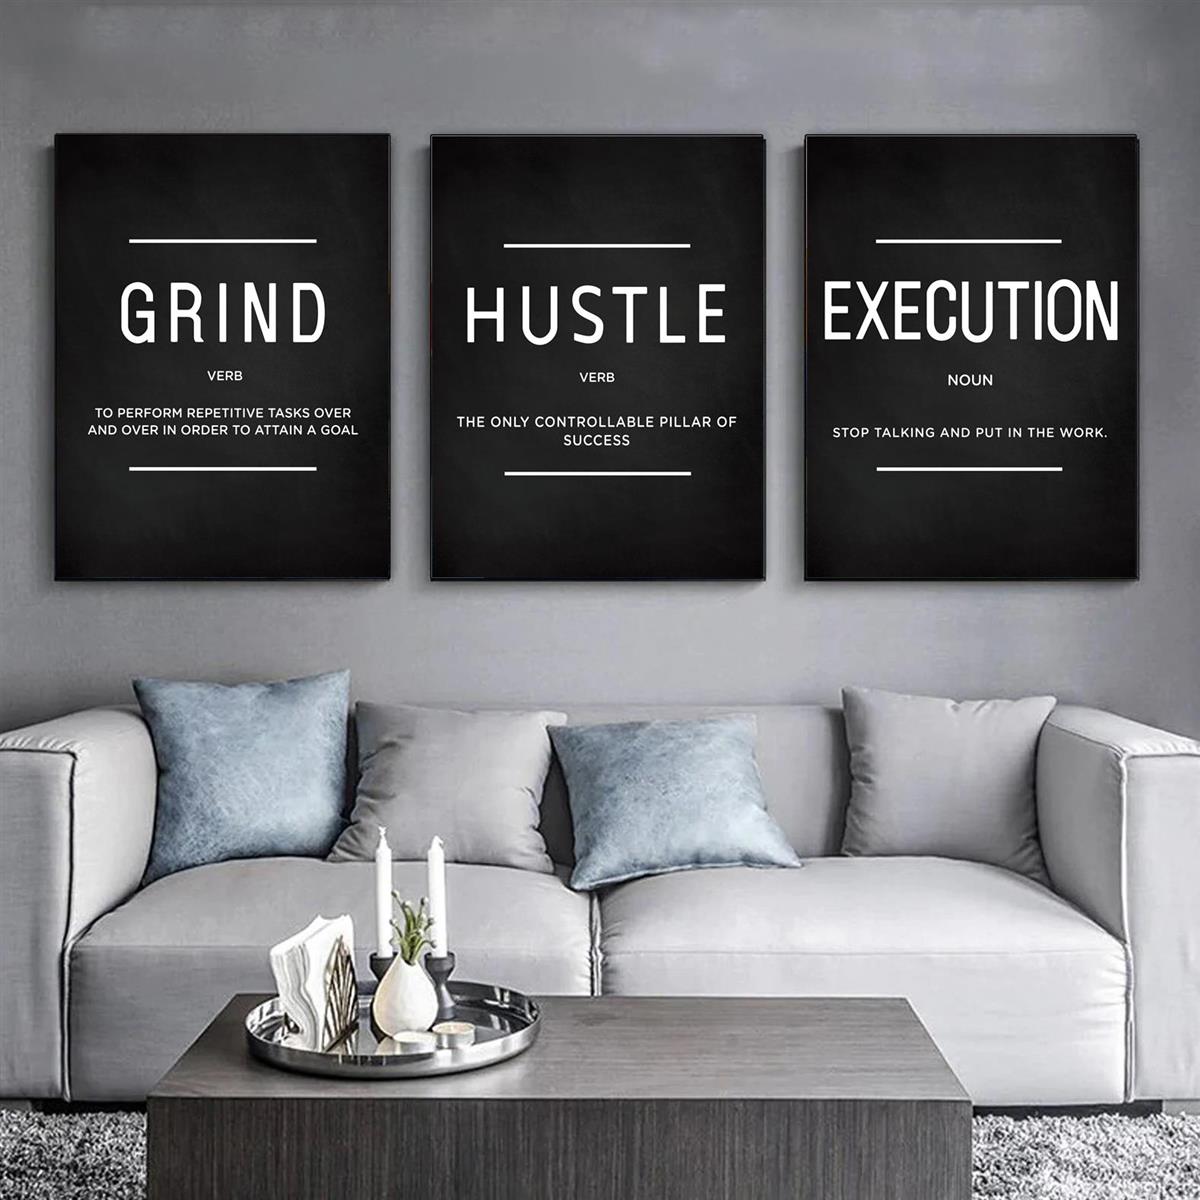 

3pcs/set Grind Hustle Execution Quotes Canvas Wall Art - Motivational Gifts For Entrepreneurs, And Home Office Decor - Inspirational Posters With No Frames